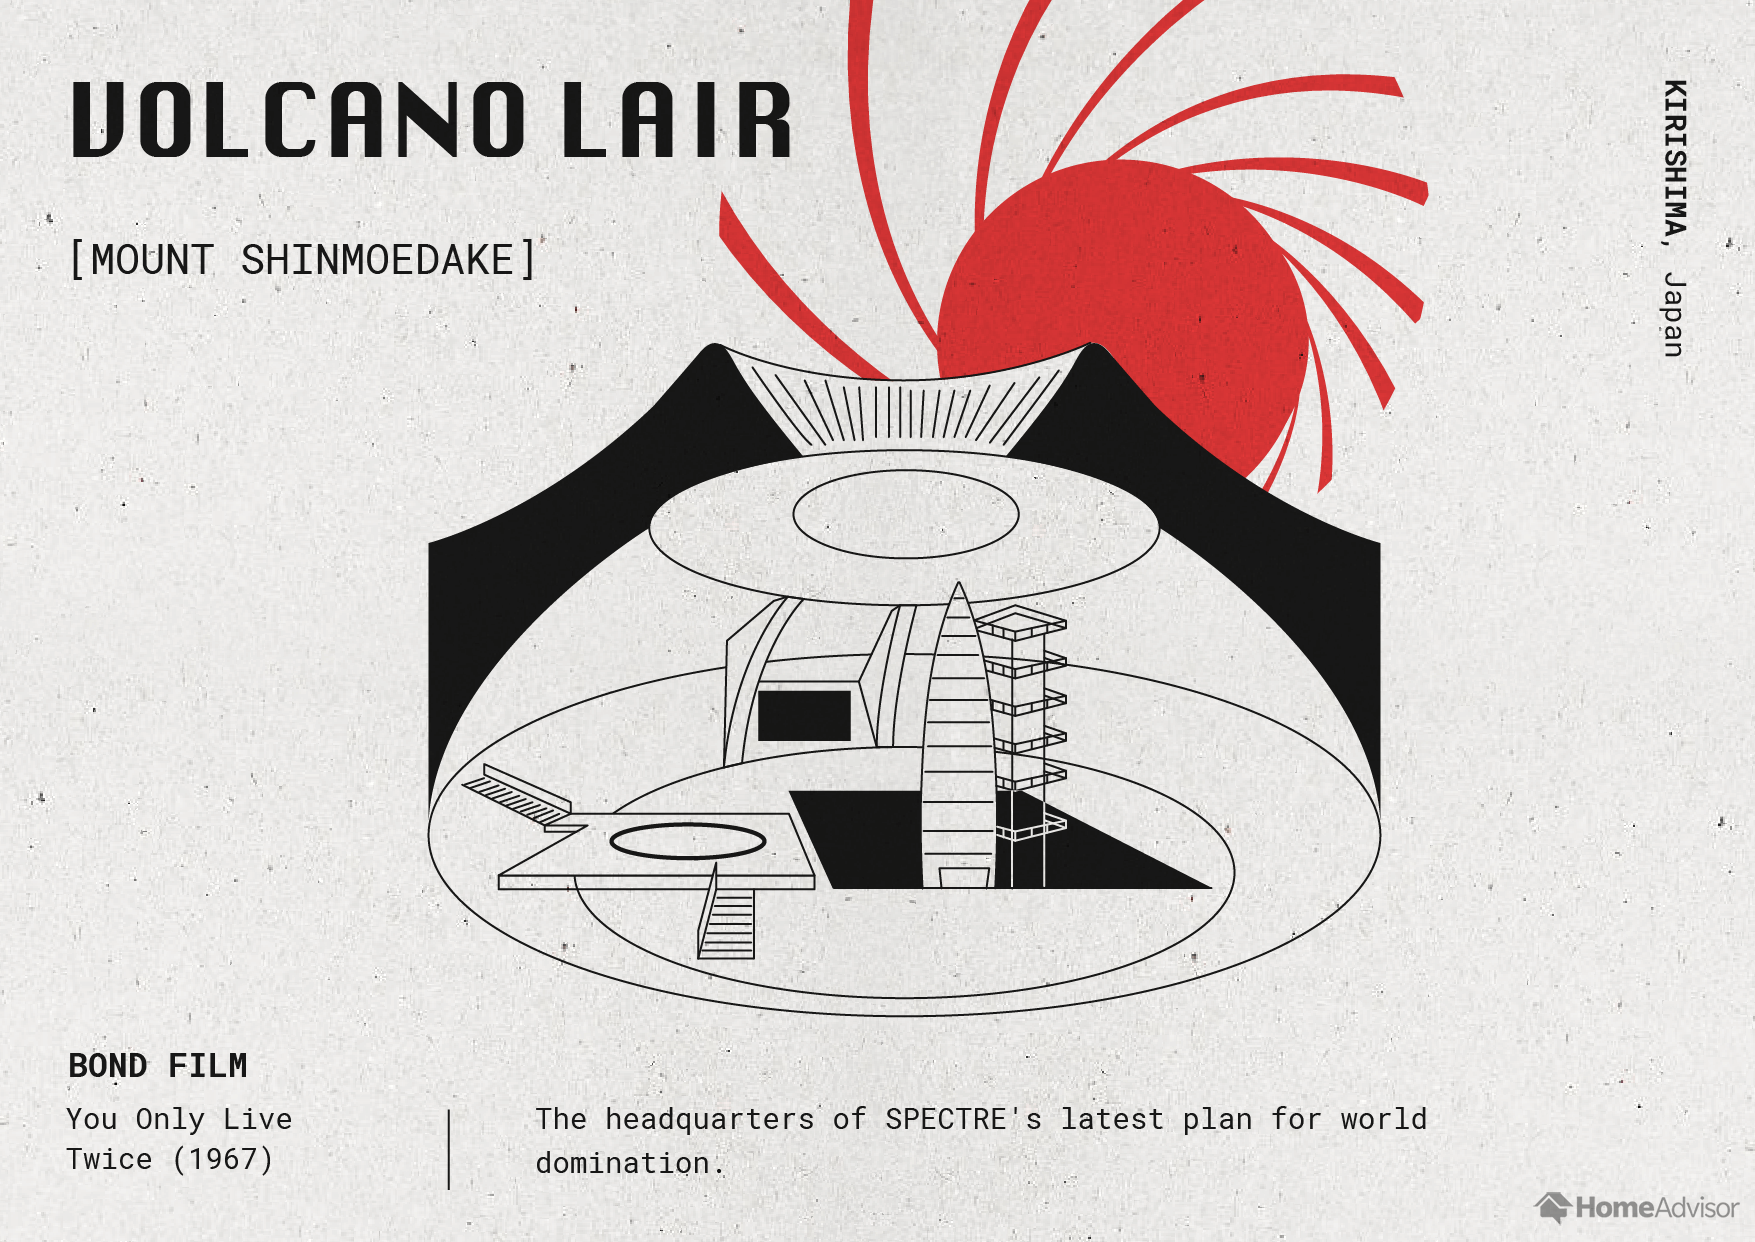 08_The-Architecture-of-James-Bond_Volcano-Lair.png